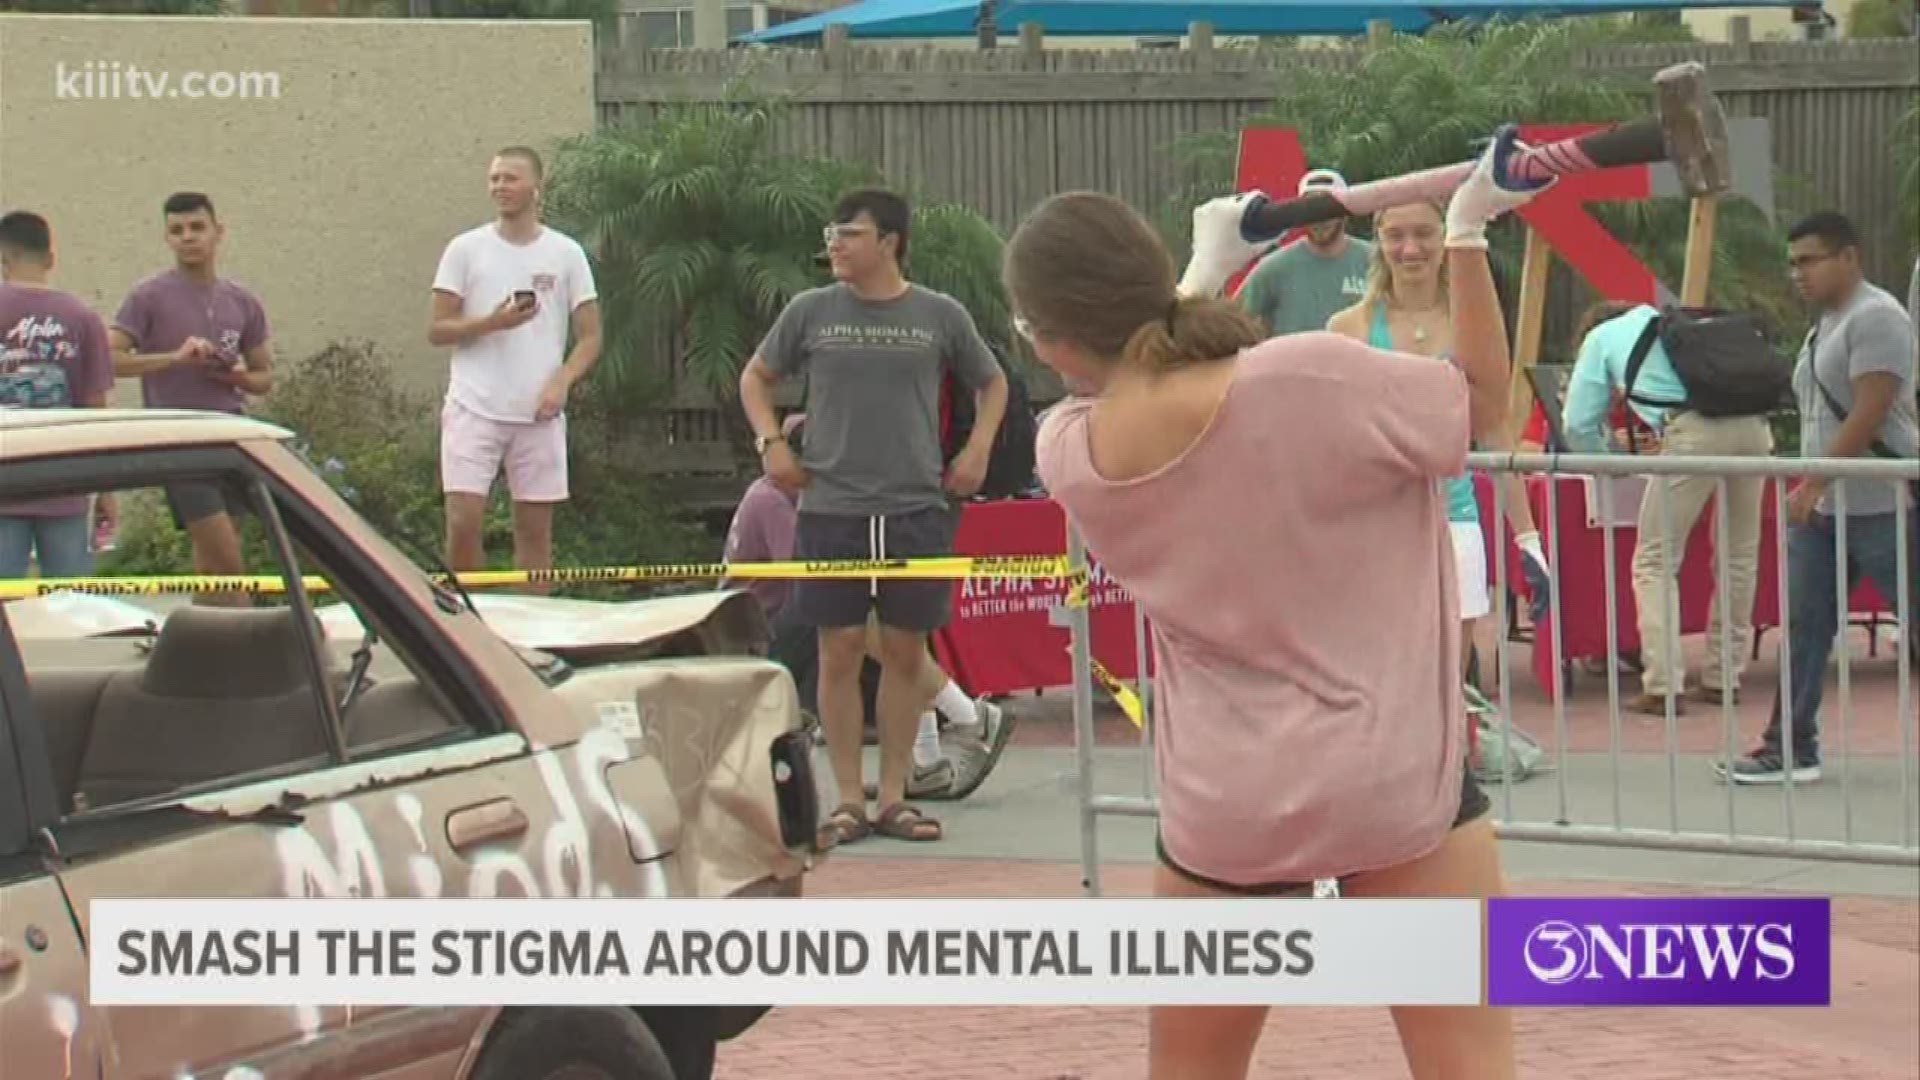 Members of a fraternity at Texas A&M University-Corpus Christi want to end the stigma associated with mental illness.